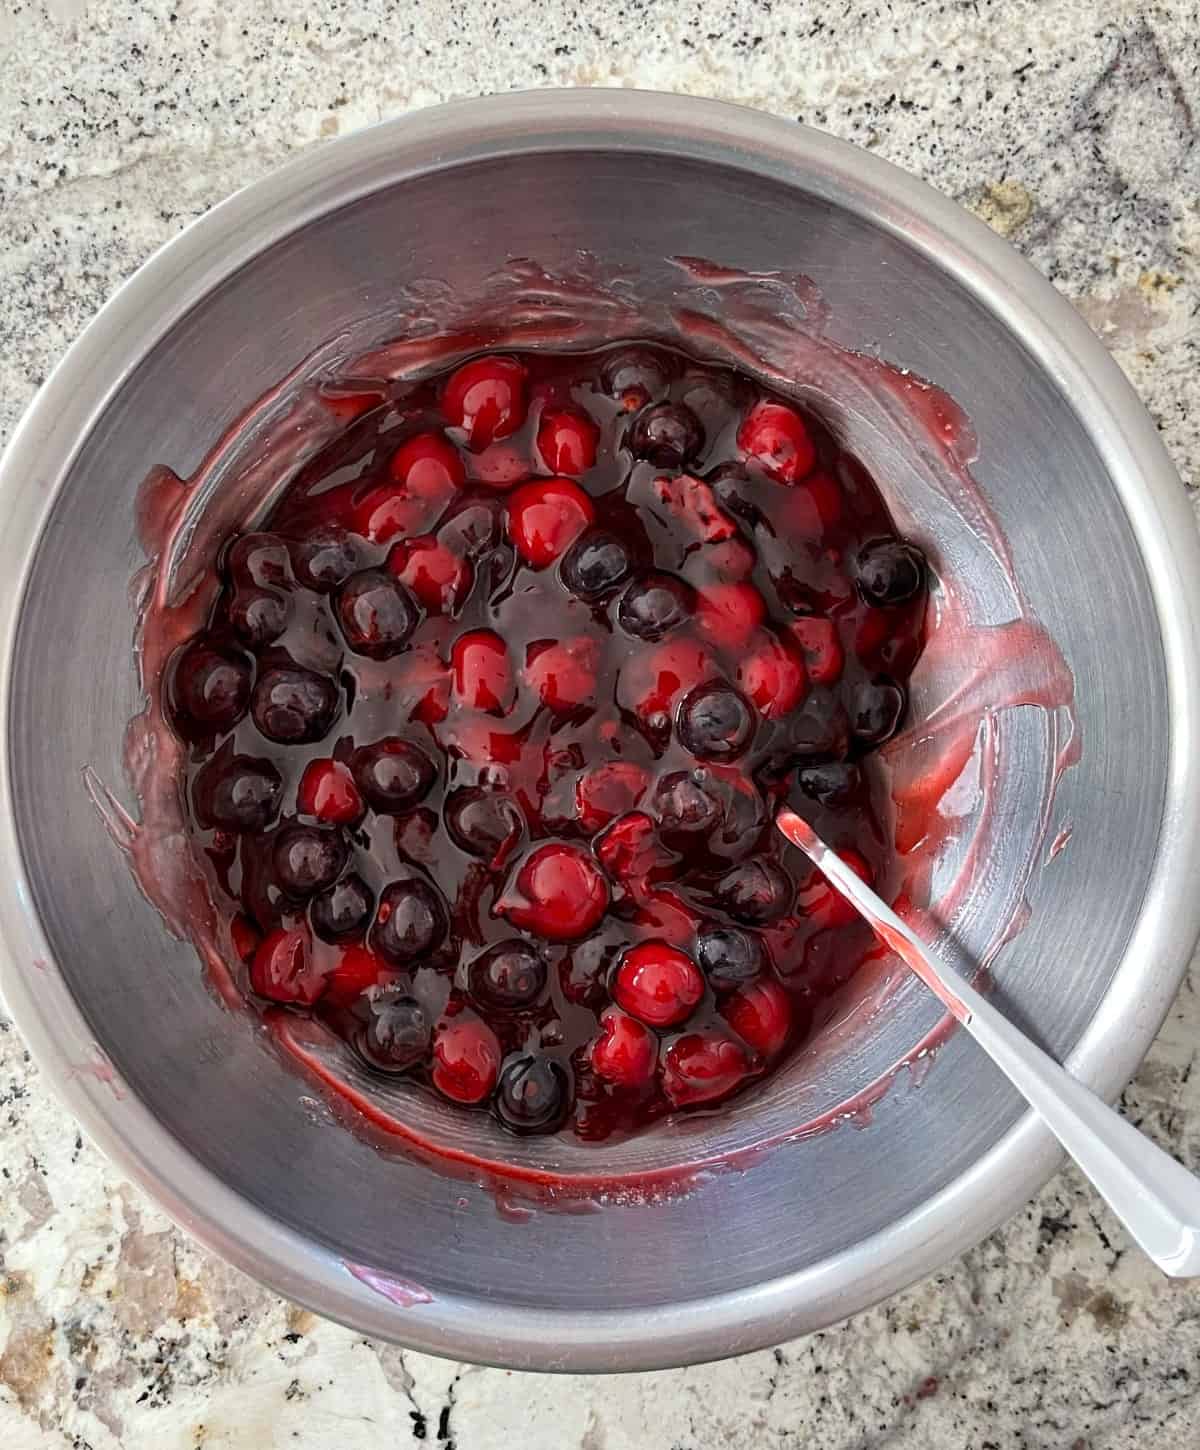 Stirring cherry pie filling, fresh blueberries, sweetener and almond extract in mixing bowl with spoon.